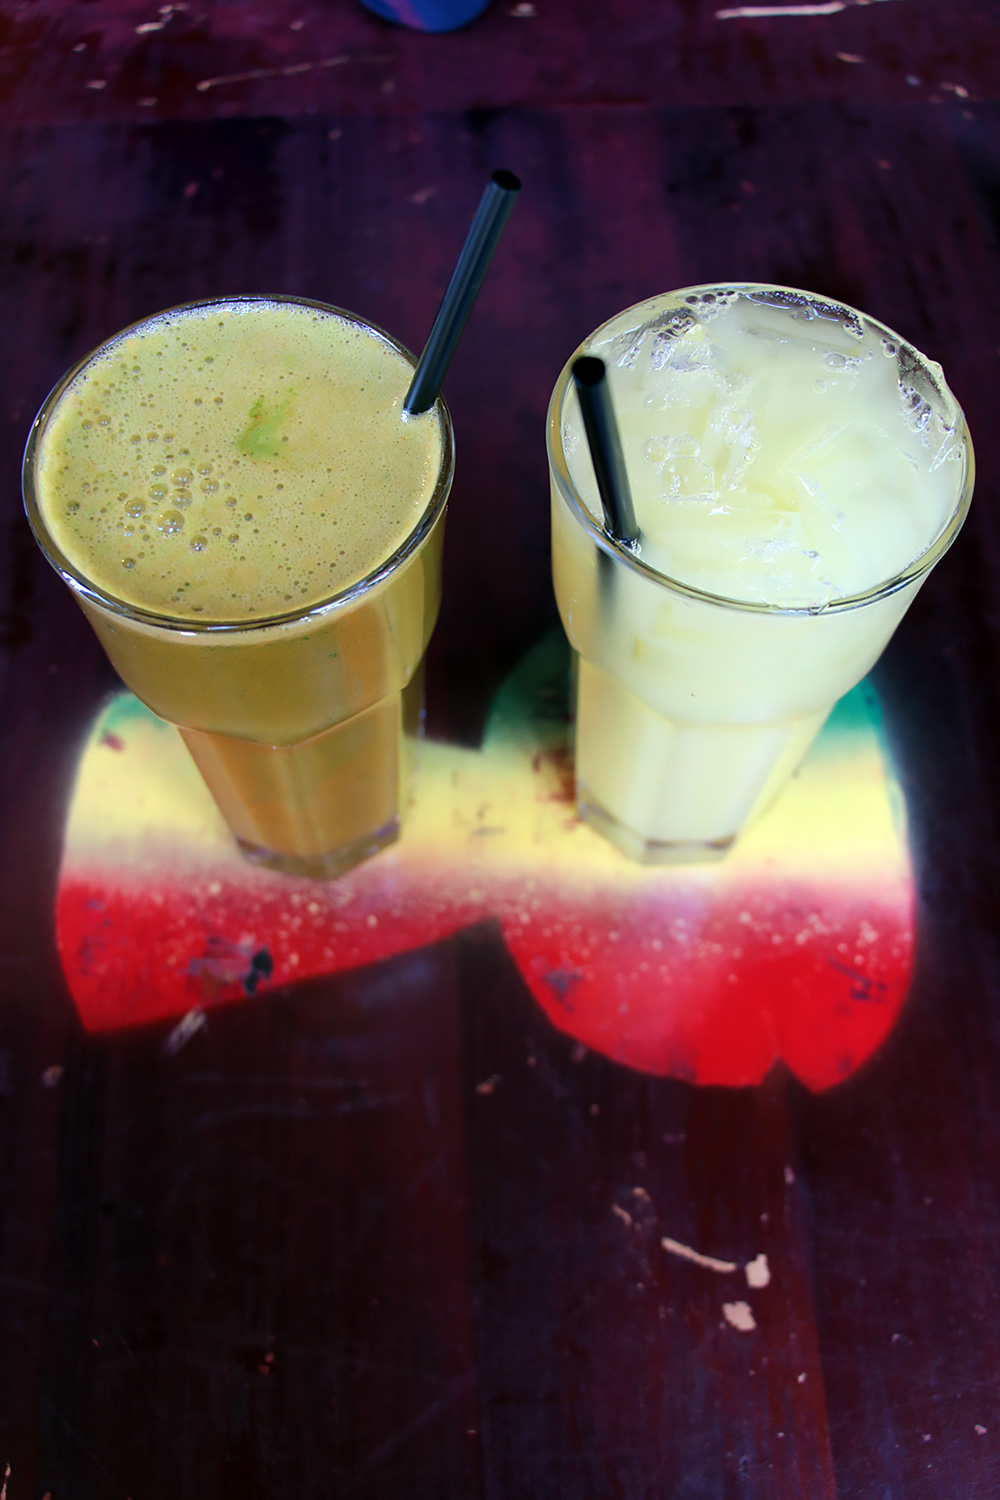 Kale, ginger, apple and carrot smoothie (L) or ginger and pineapple juice (R).